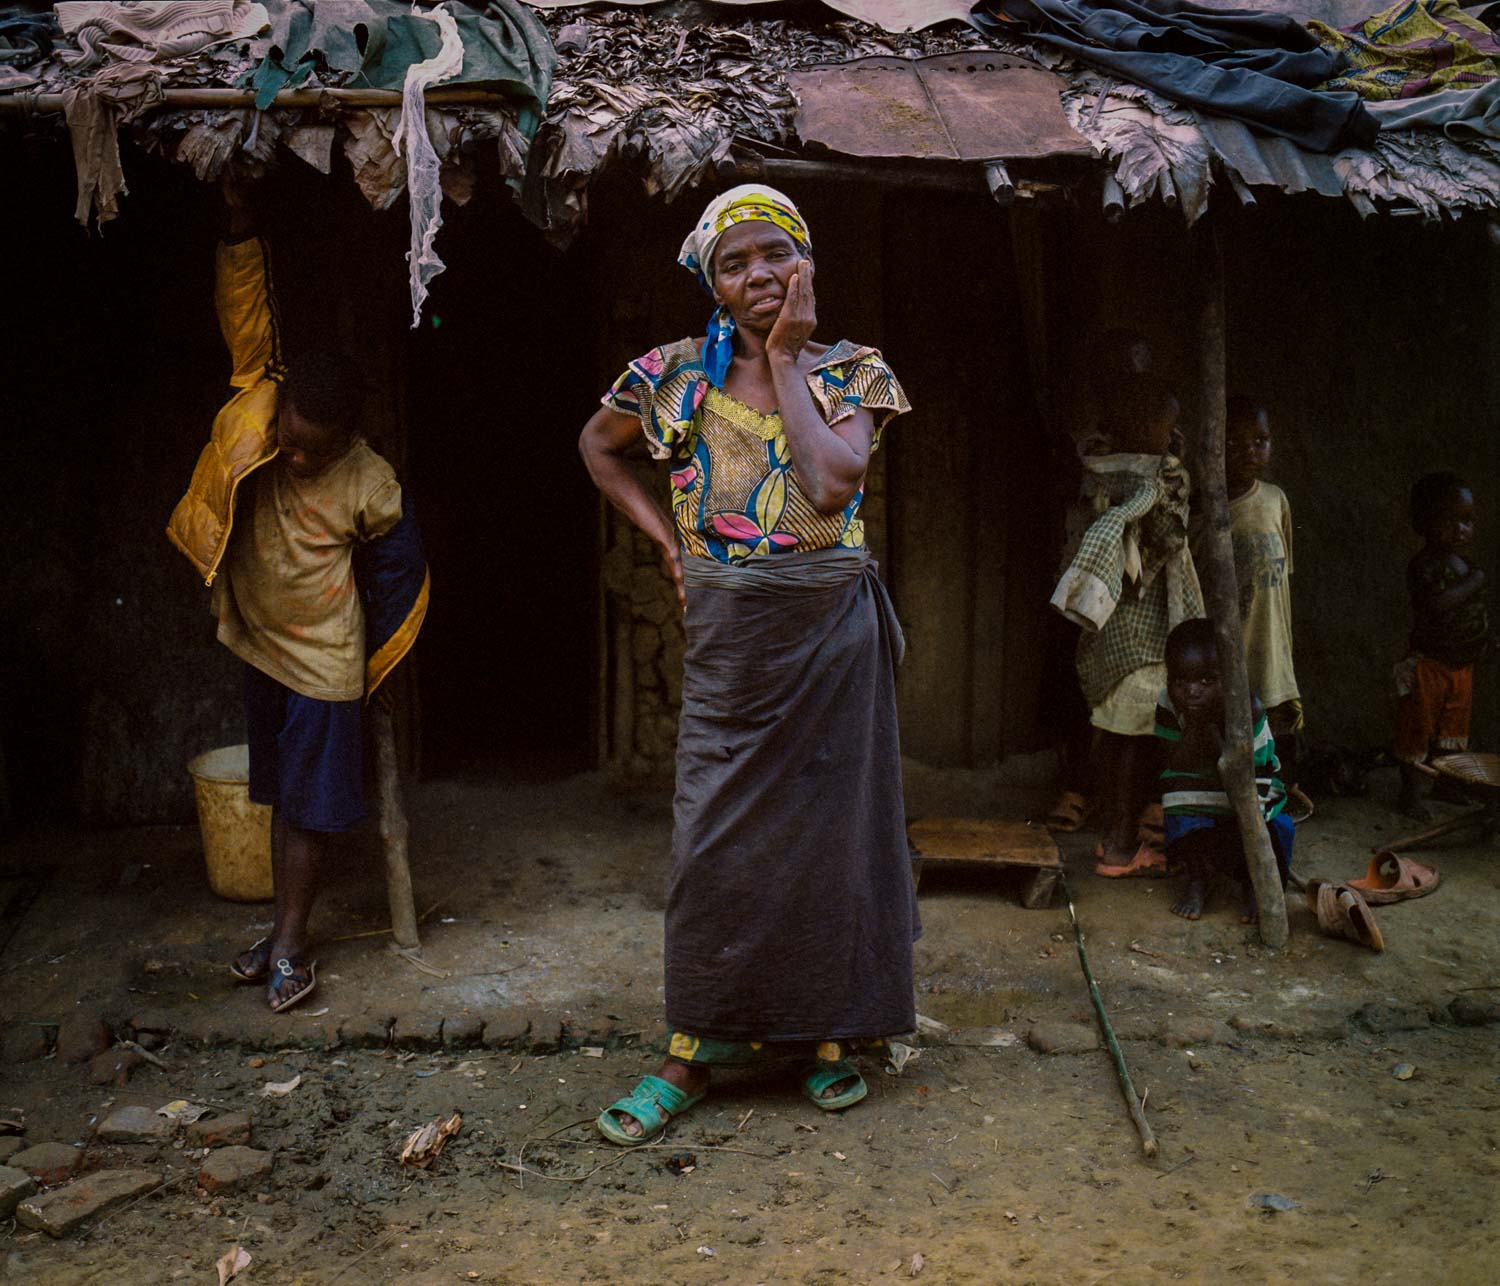  Widow Madelaine Kapinga stands outside of her makeshift home in a part of Lulingu town that is occupied by people displaced by the conflict. Her story is not an uncommon one in the area, where most have lost family to massacres committed by the Inte